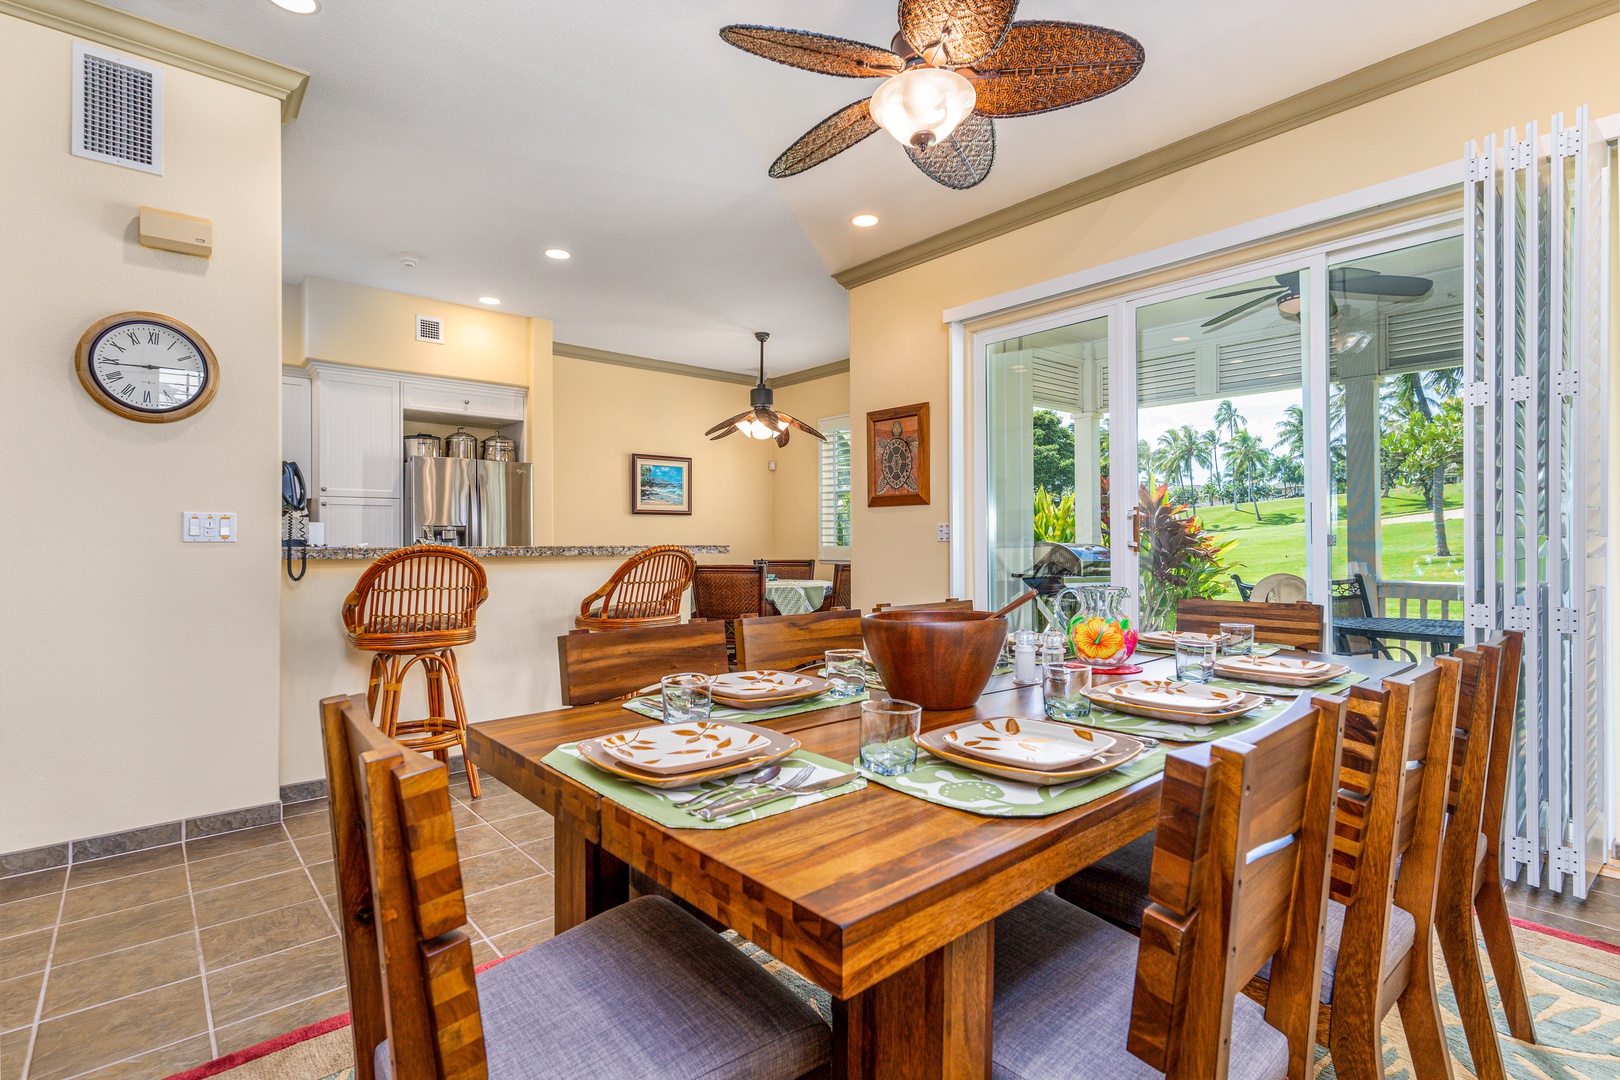 Kapolei Vacation Rentals, Coconut Plantation 1100-2 - Bring the cards for game night and island breezes.